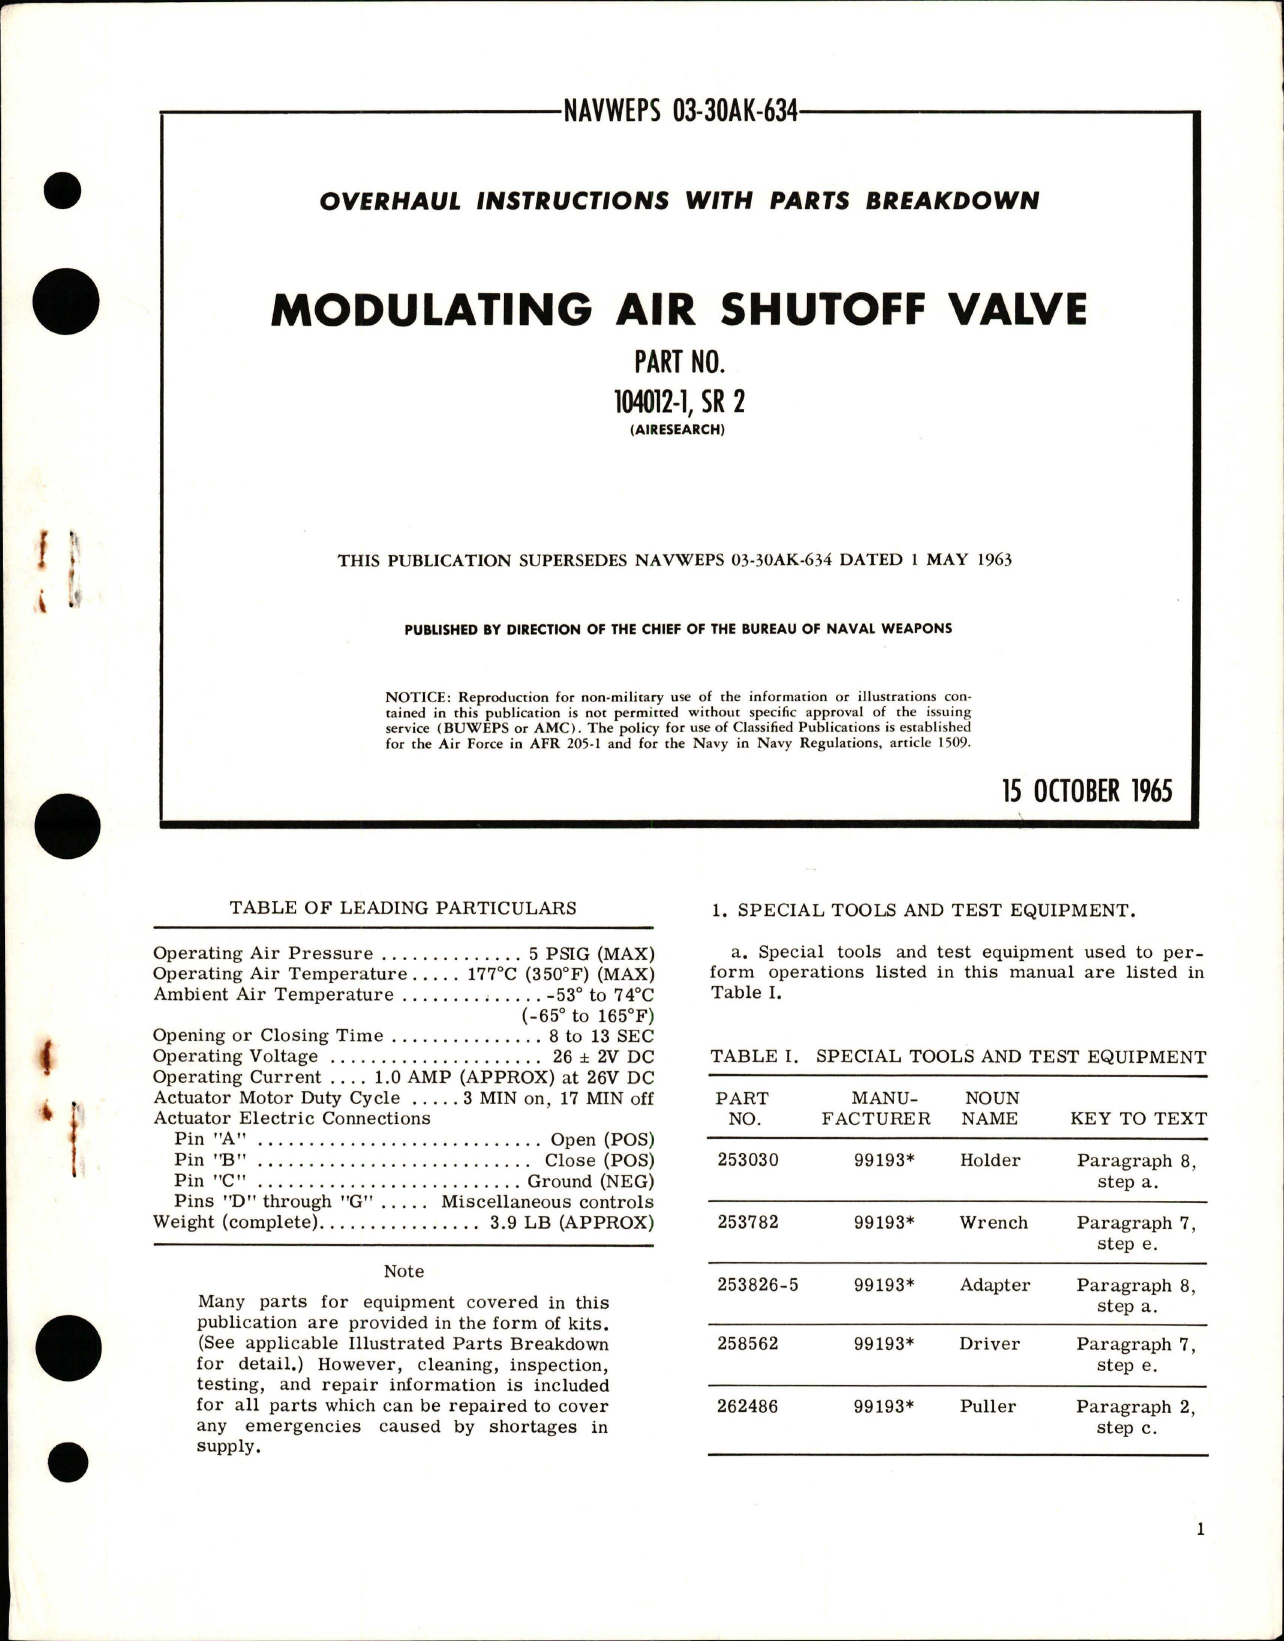 Sample page 1 from AirCorps Library document: Overhaul Instructions with Parts Breakdown for Modulating Air Shutoff Valve - Part 104012-1, SR2